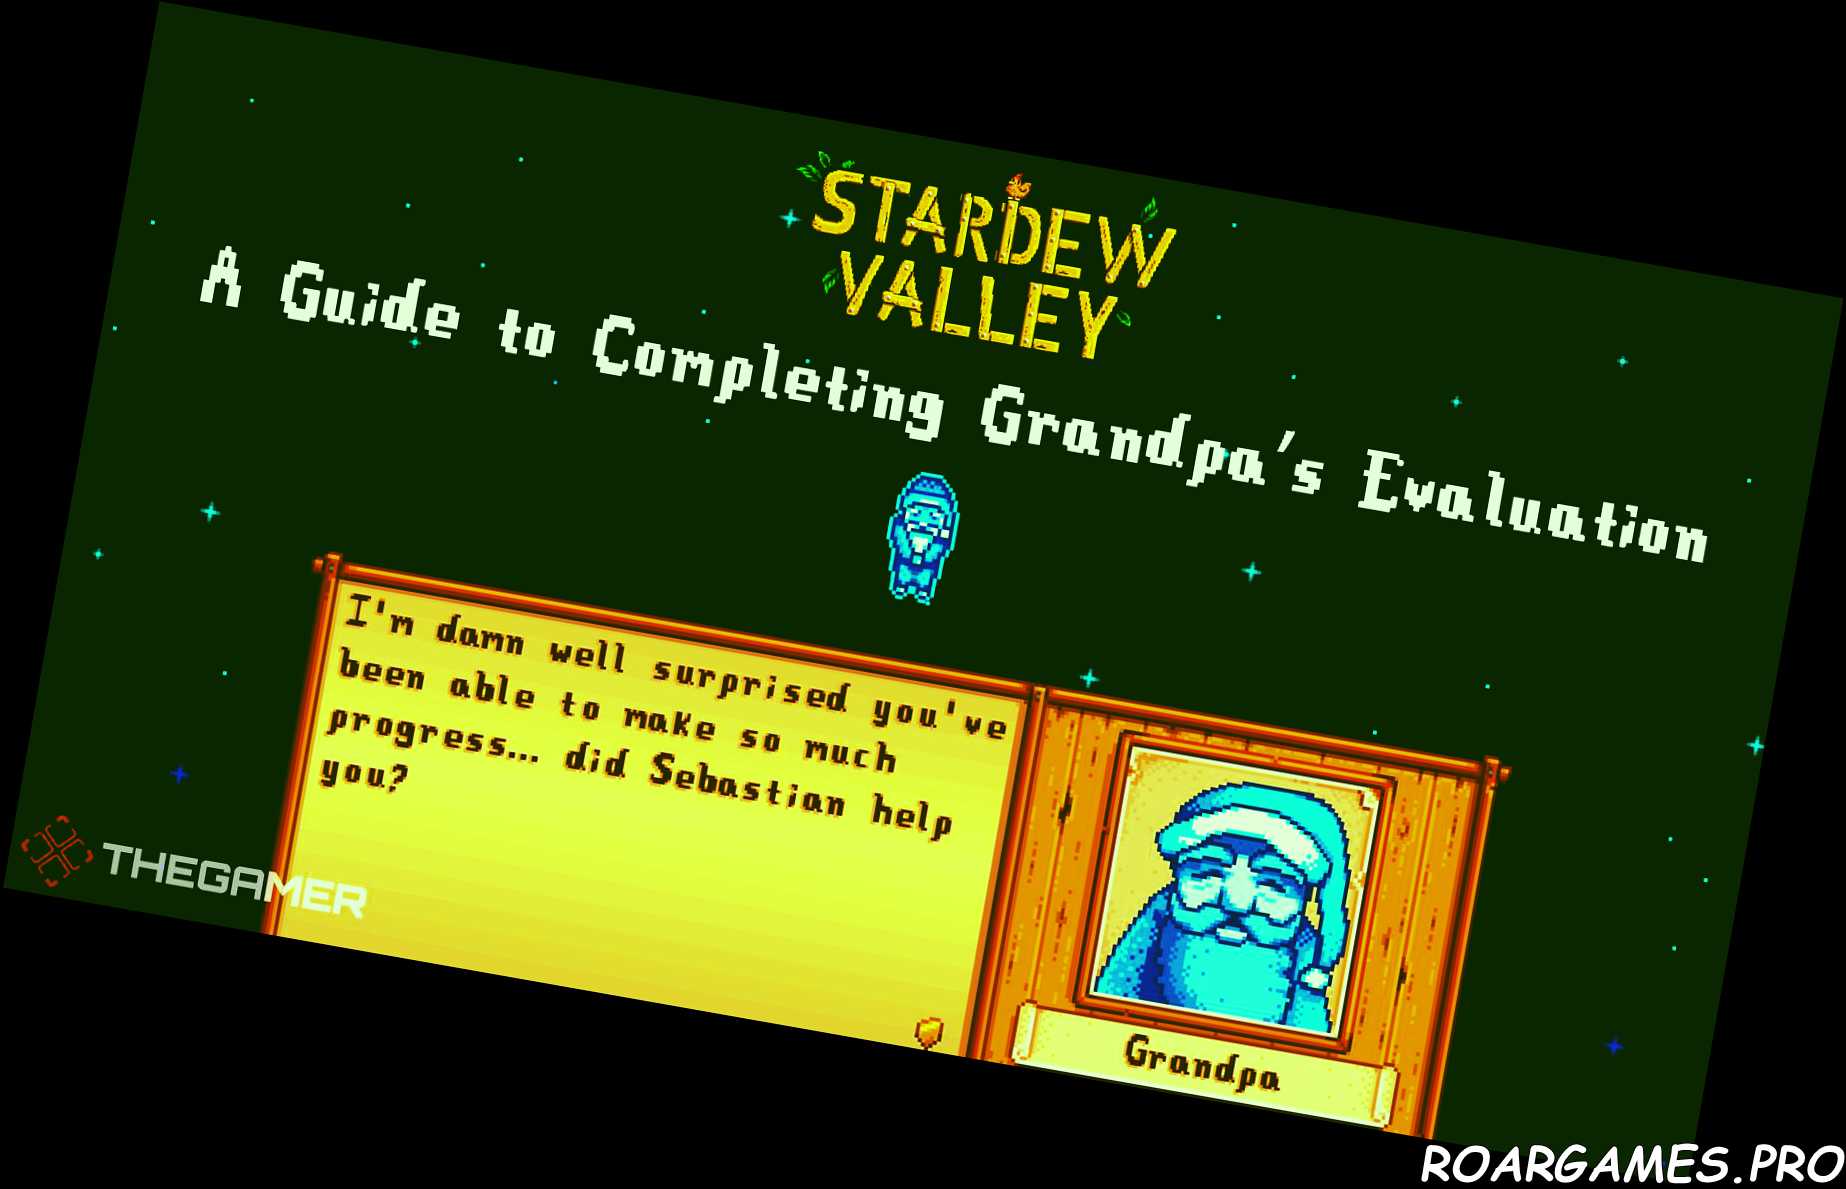 Stardew Valley A Guide to Completing Grandpas Evaluation